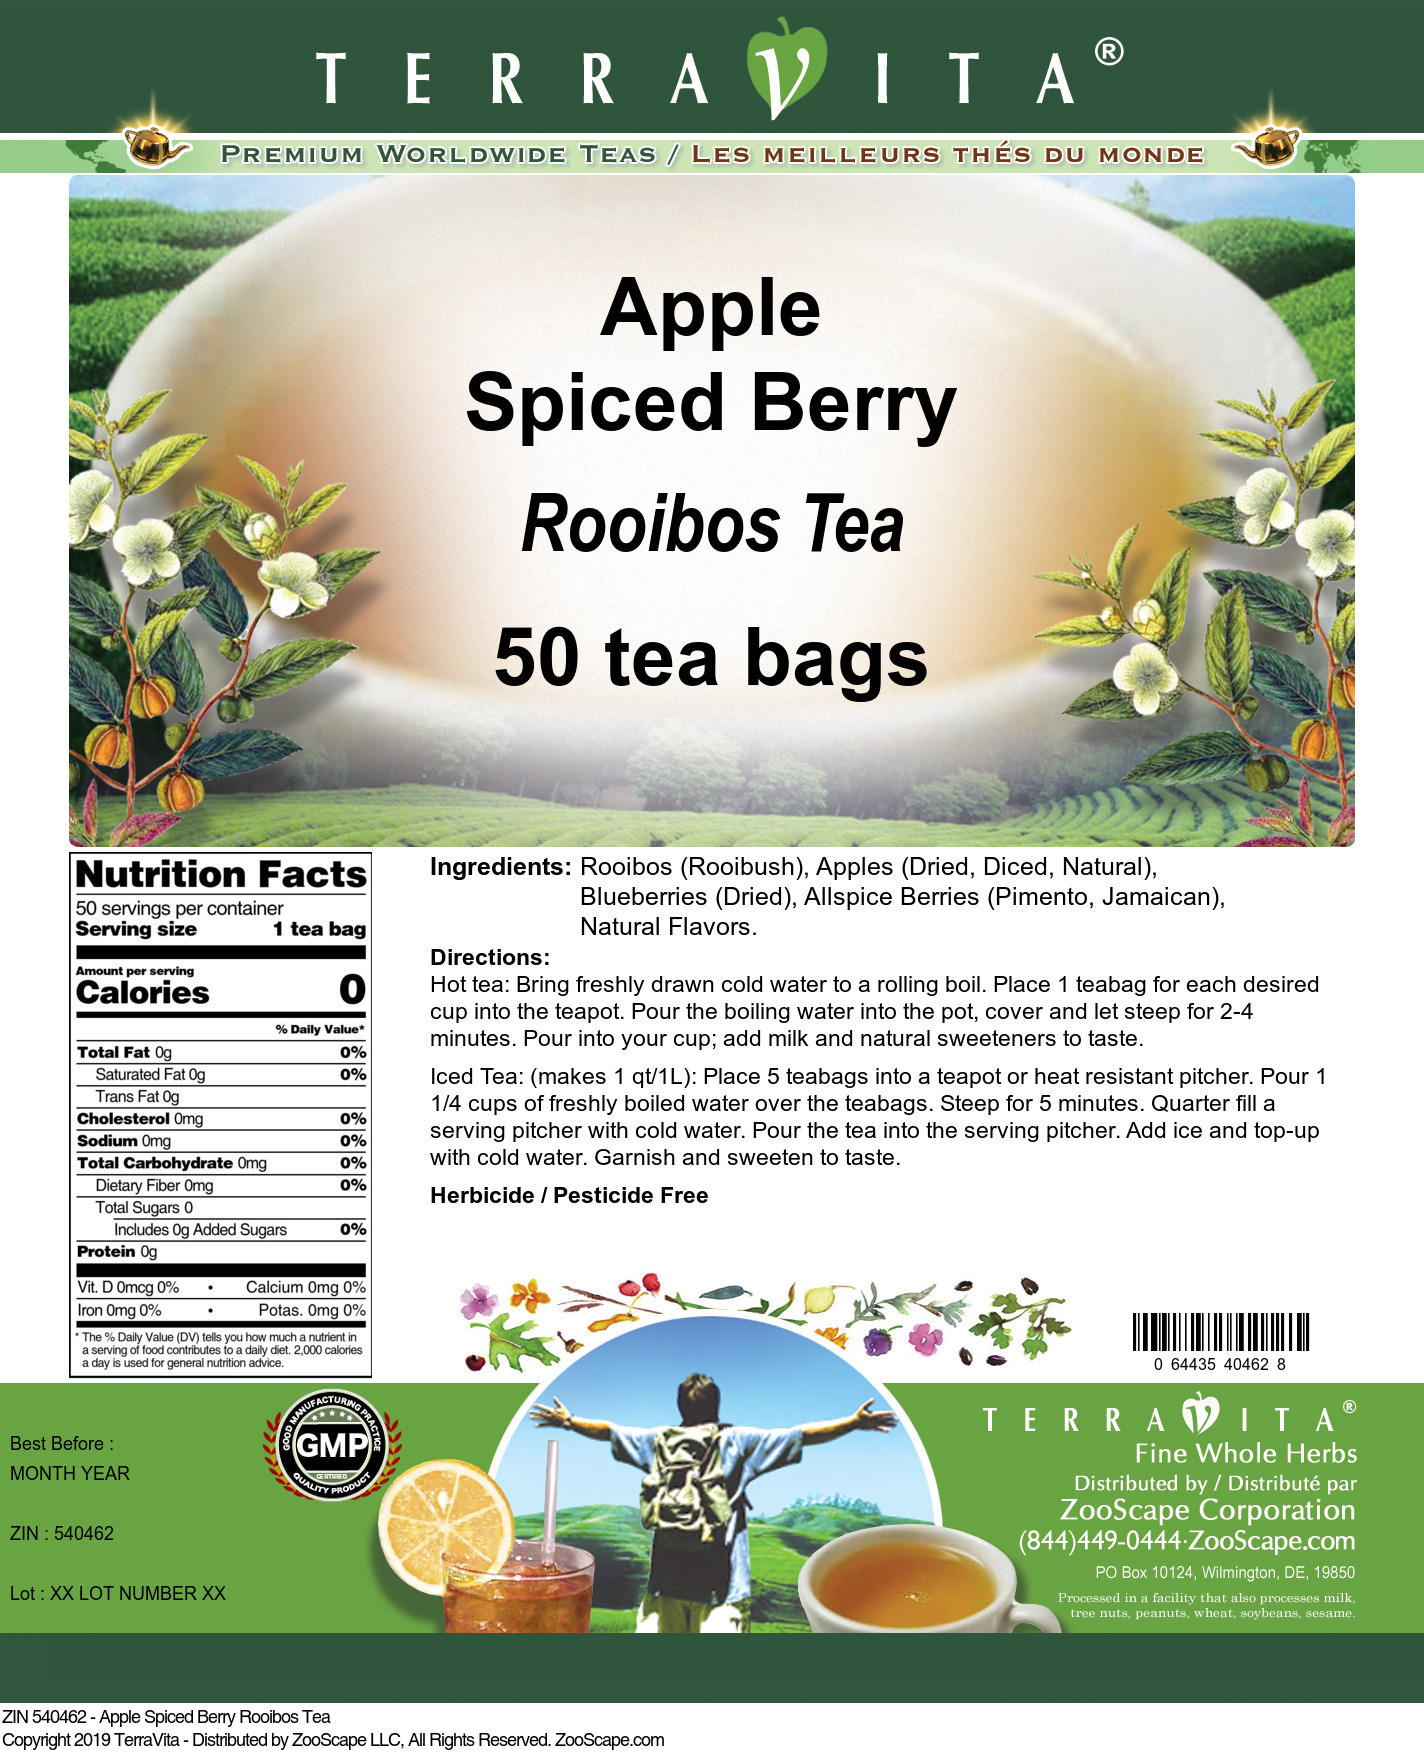 Apple Spiced Berry Rooibos Tea - Label